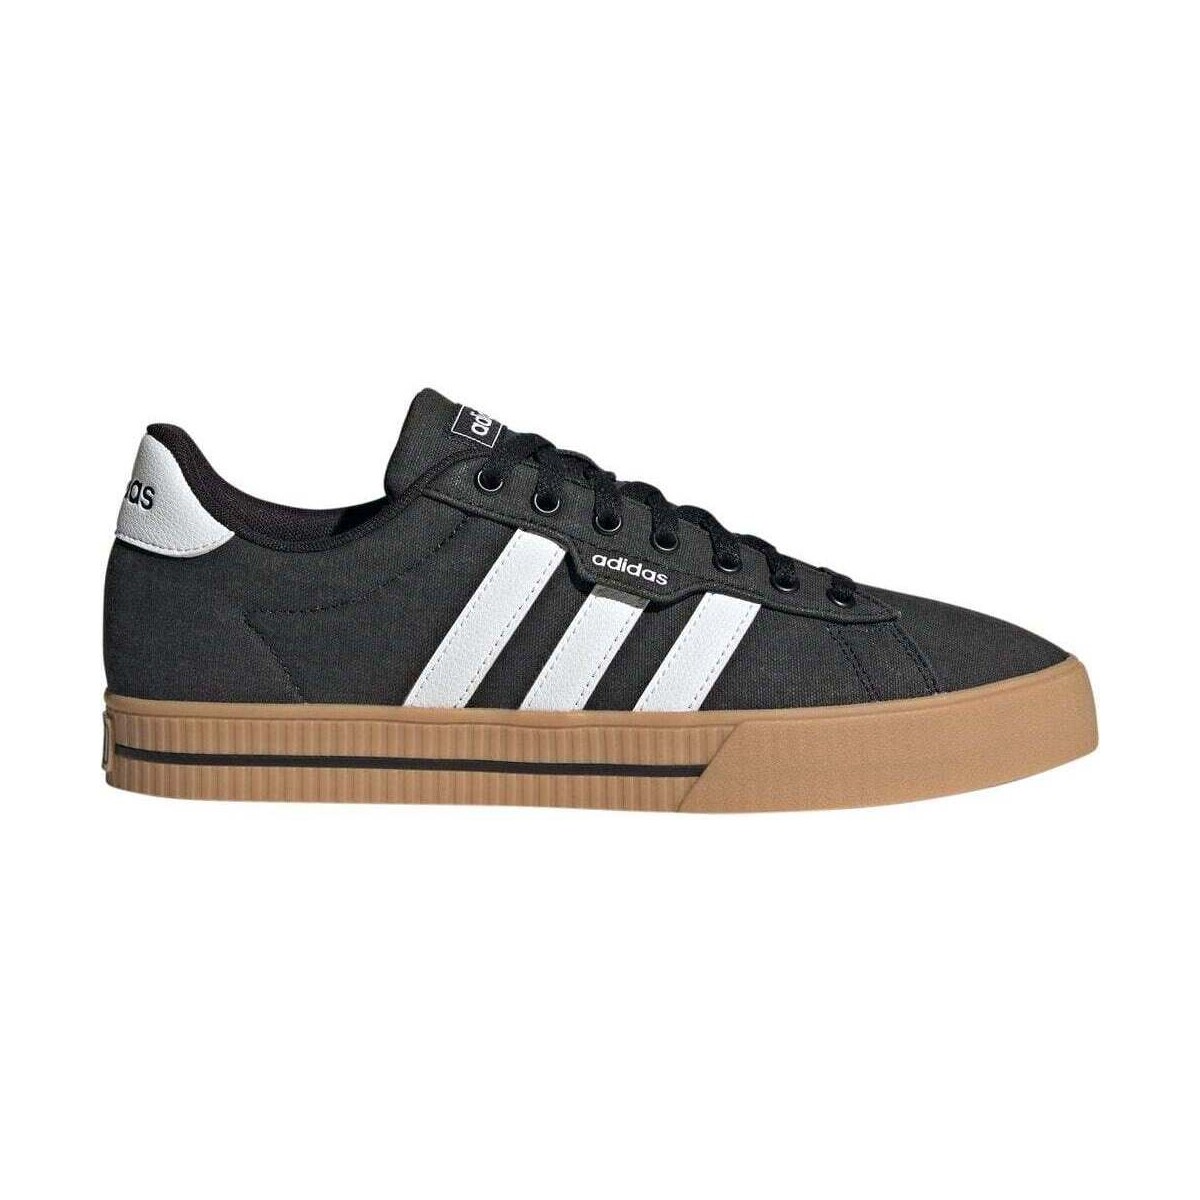 Chaussures Homme Baskets mode adidas Originals DAILY 3.0 Multicolore